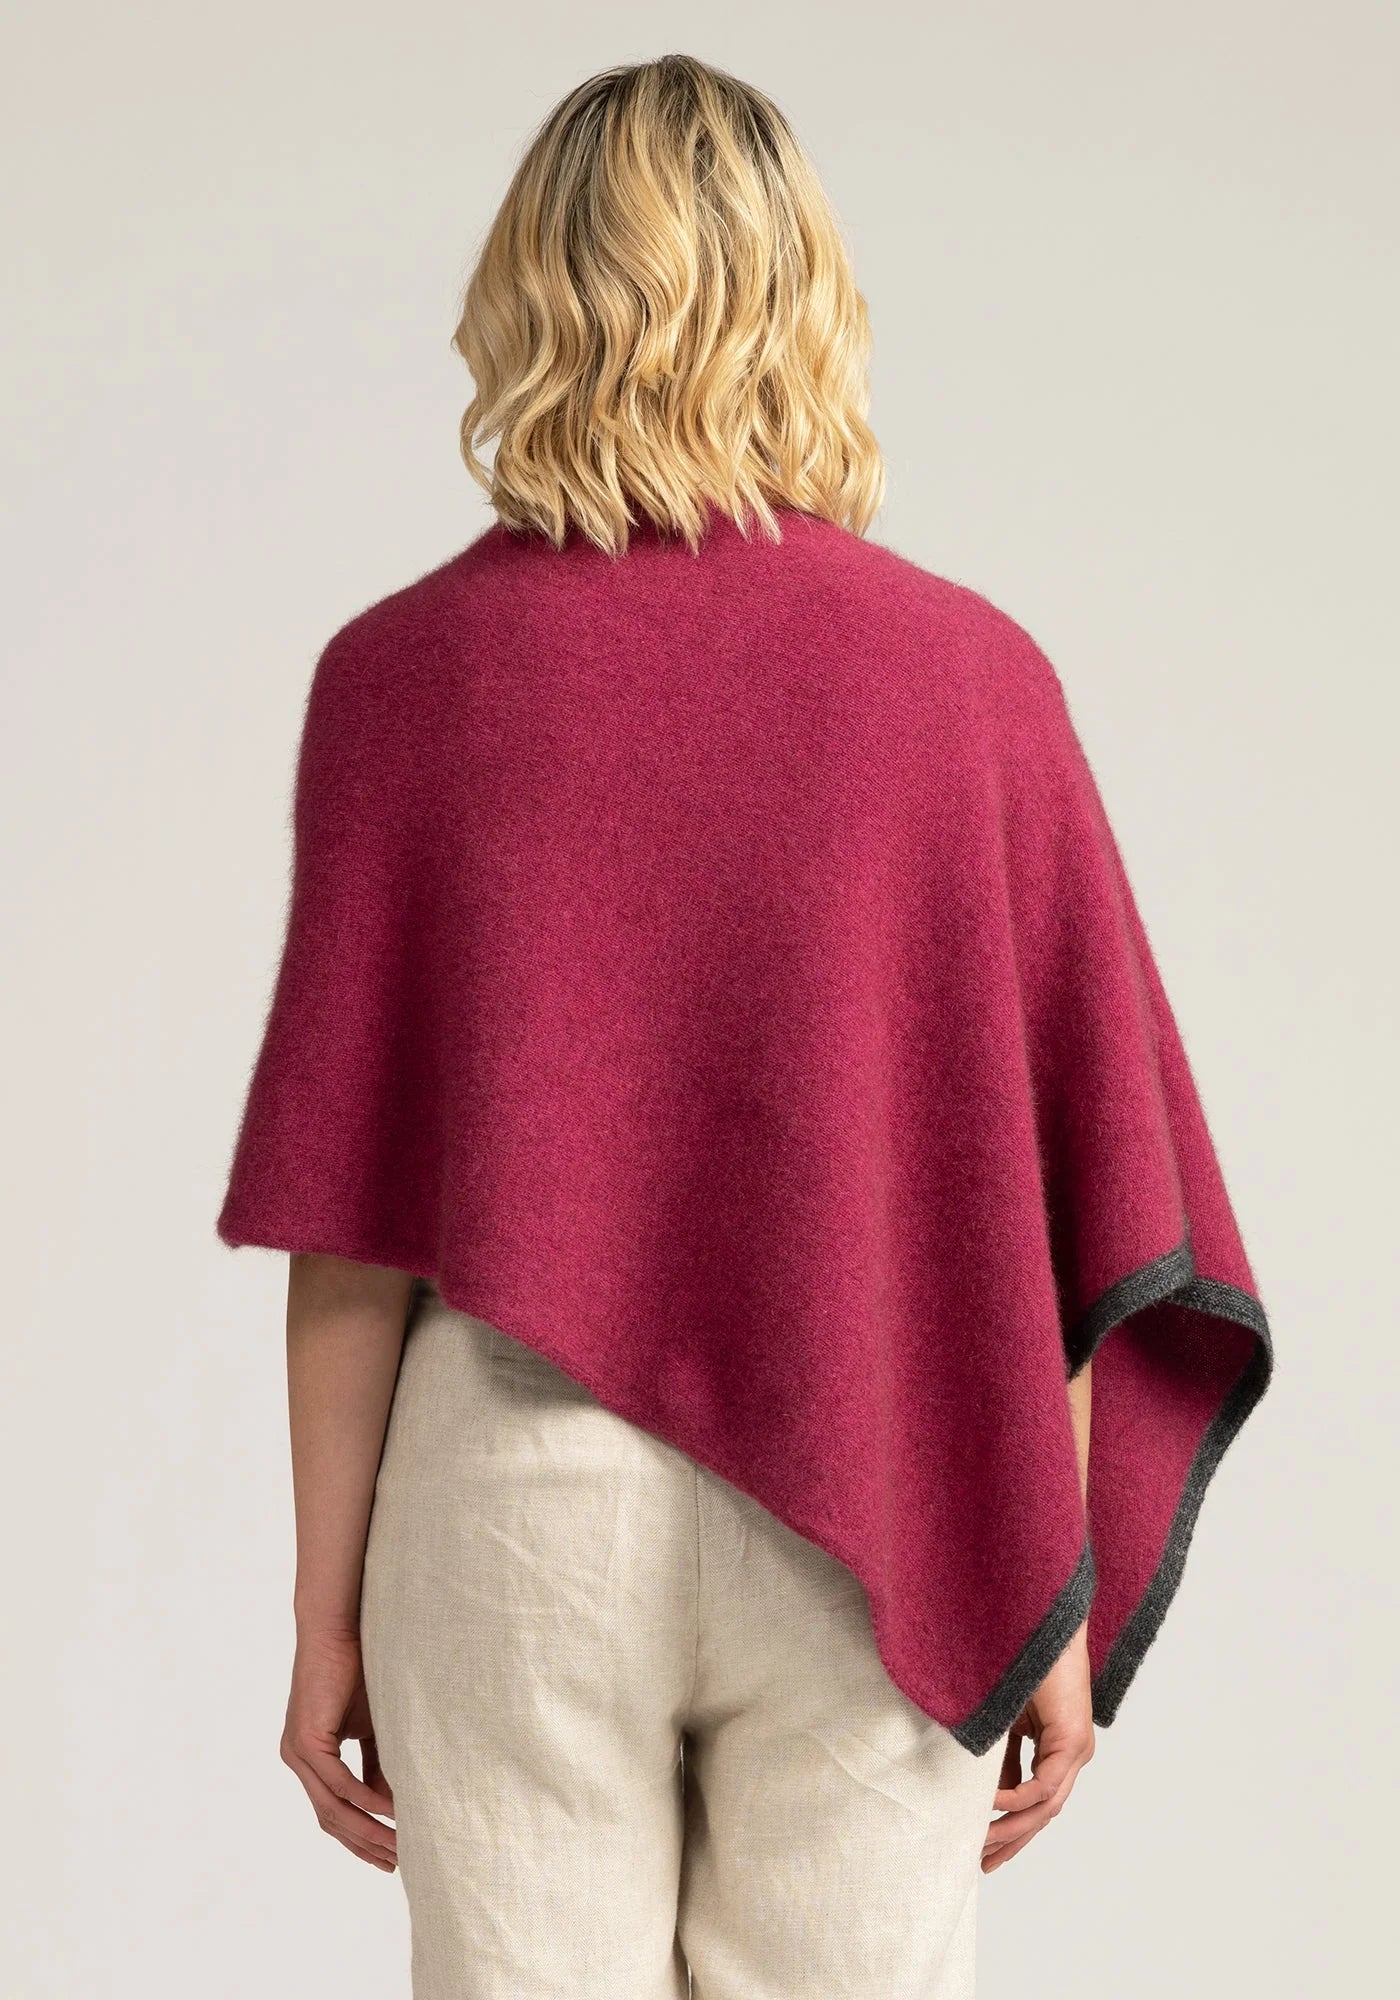 Elevate your style with our Pink Merino Wool Poncho. Soft, warm, and oh-so-stylish. Shop now!